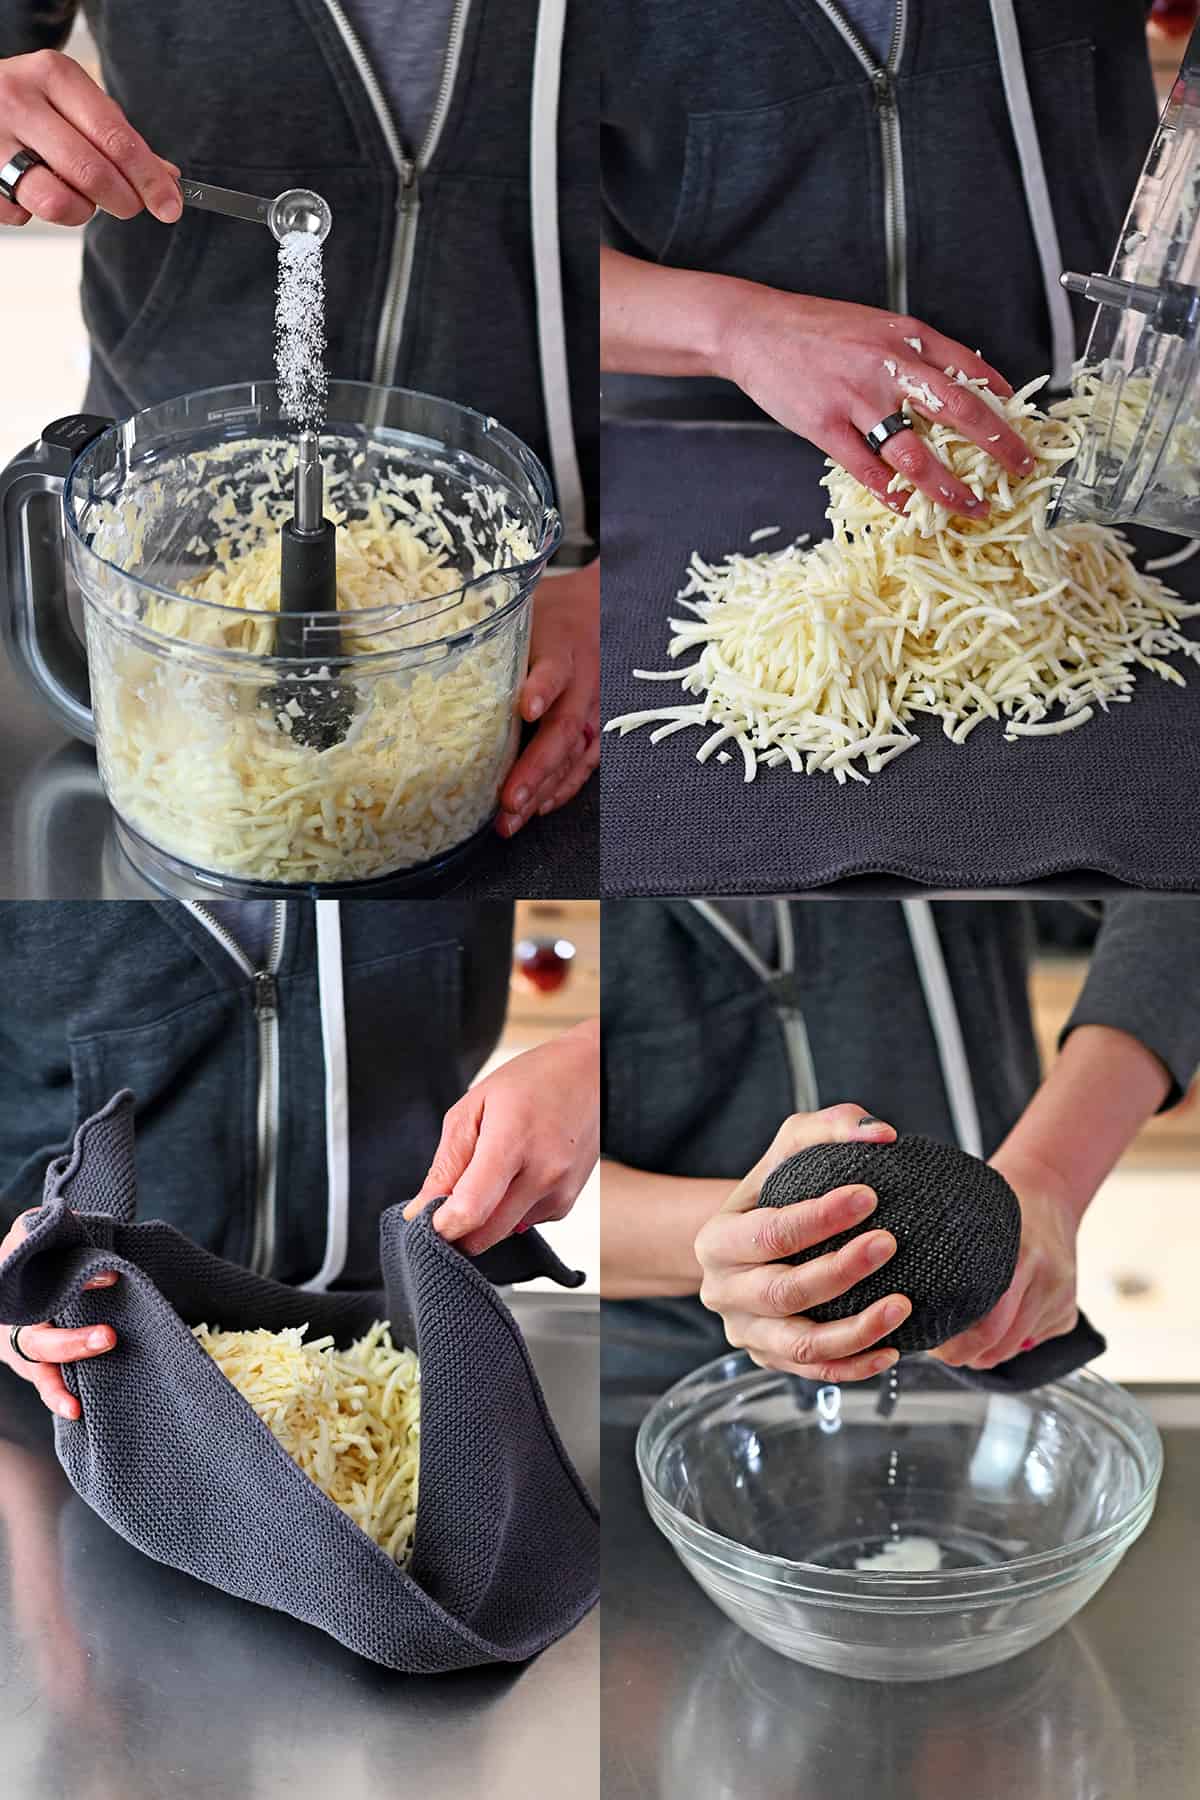 Four sequential photos that show shredded potato in a food processor, a hand adding the potatoes to a clean towel, and wringing the potatoes in the towel to release the liquid.